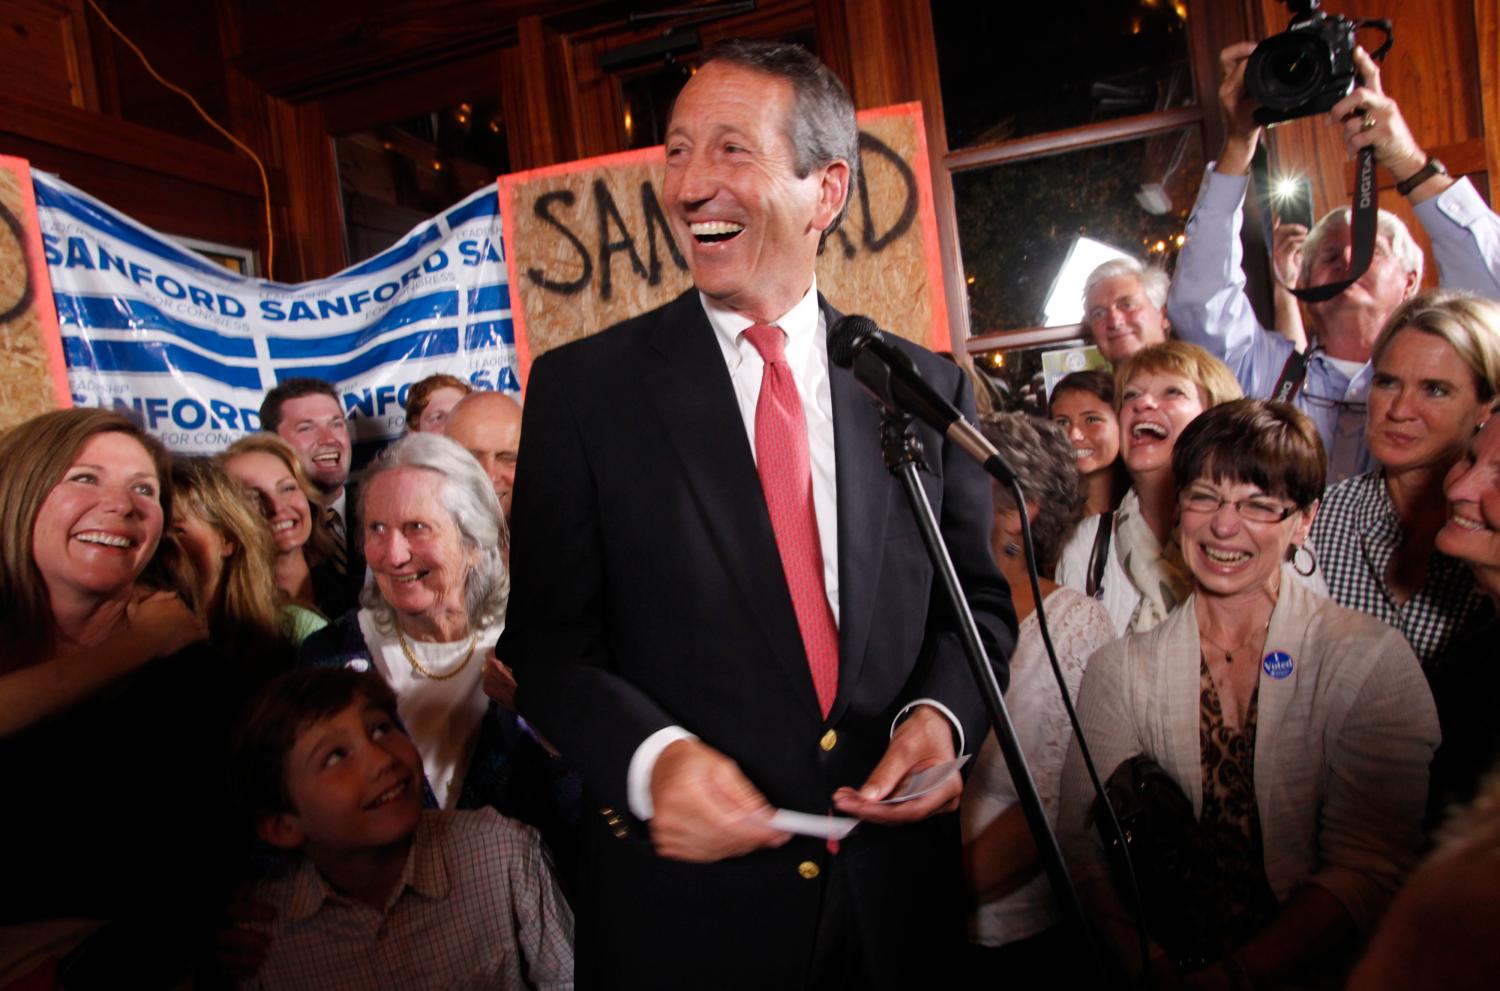 Former South Carolina Governor Mark Sanford celebrates his victory with a large crowd in the South Carolina first district congressional race at Liberty Tap Room in Mount Pleasant, South Carolina May 7, 2013. Republican former Governor Sanford made a political comeback on Tuesday, rebounding from a sex scandal to beat Democrat Elizabeth Colbert Busch in a congressional race to represent coastal South Carolina. REUTERS/Randall Hill  (UNITED STATES - Tags: POLITICS ELECTIONS TPX IMAGES OF THE DAY) - GM1E9580T3T01